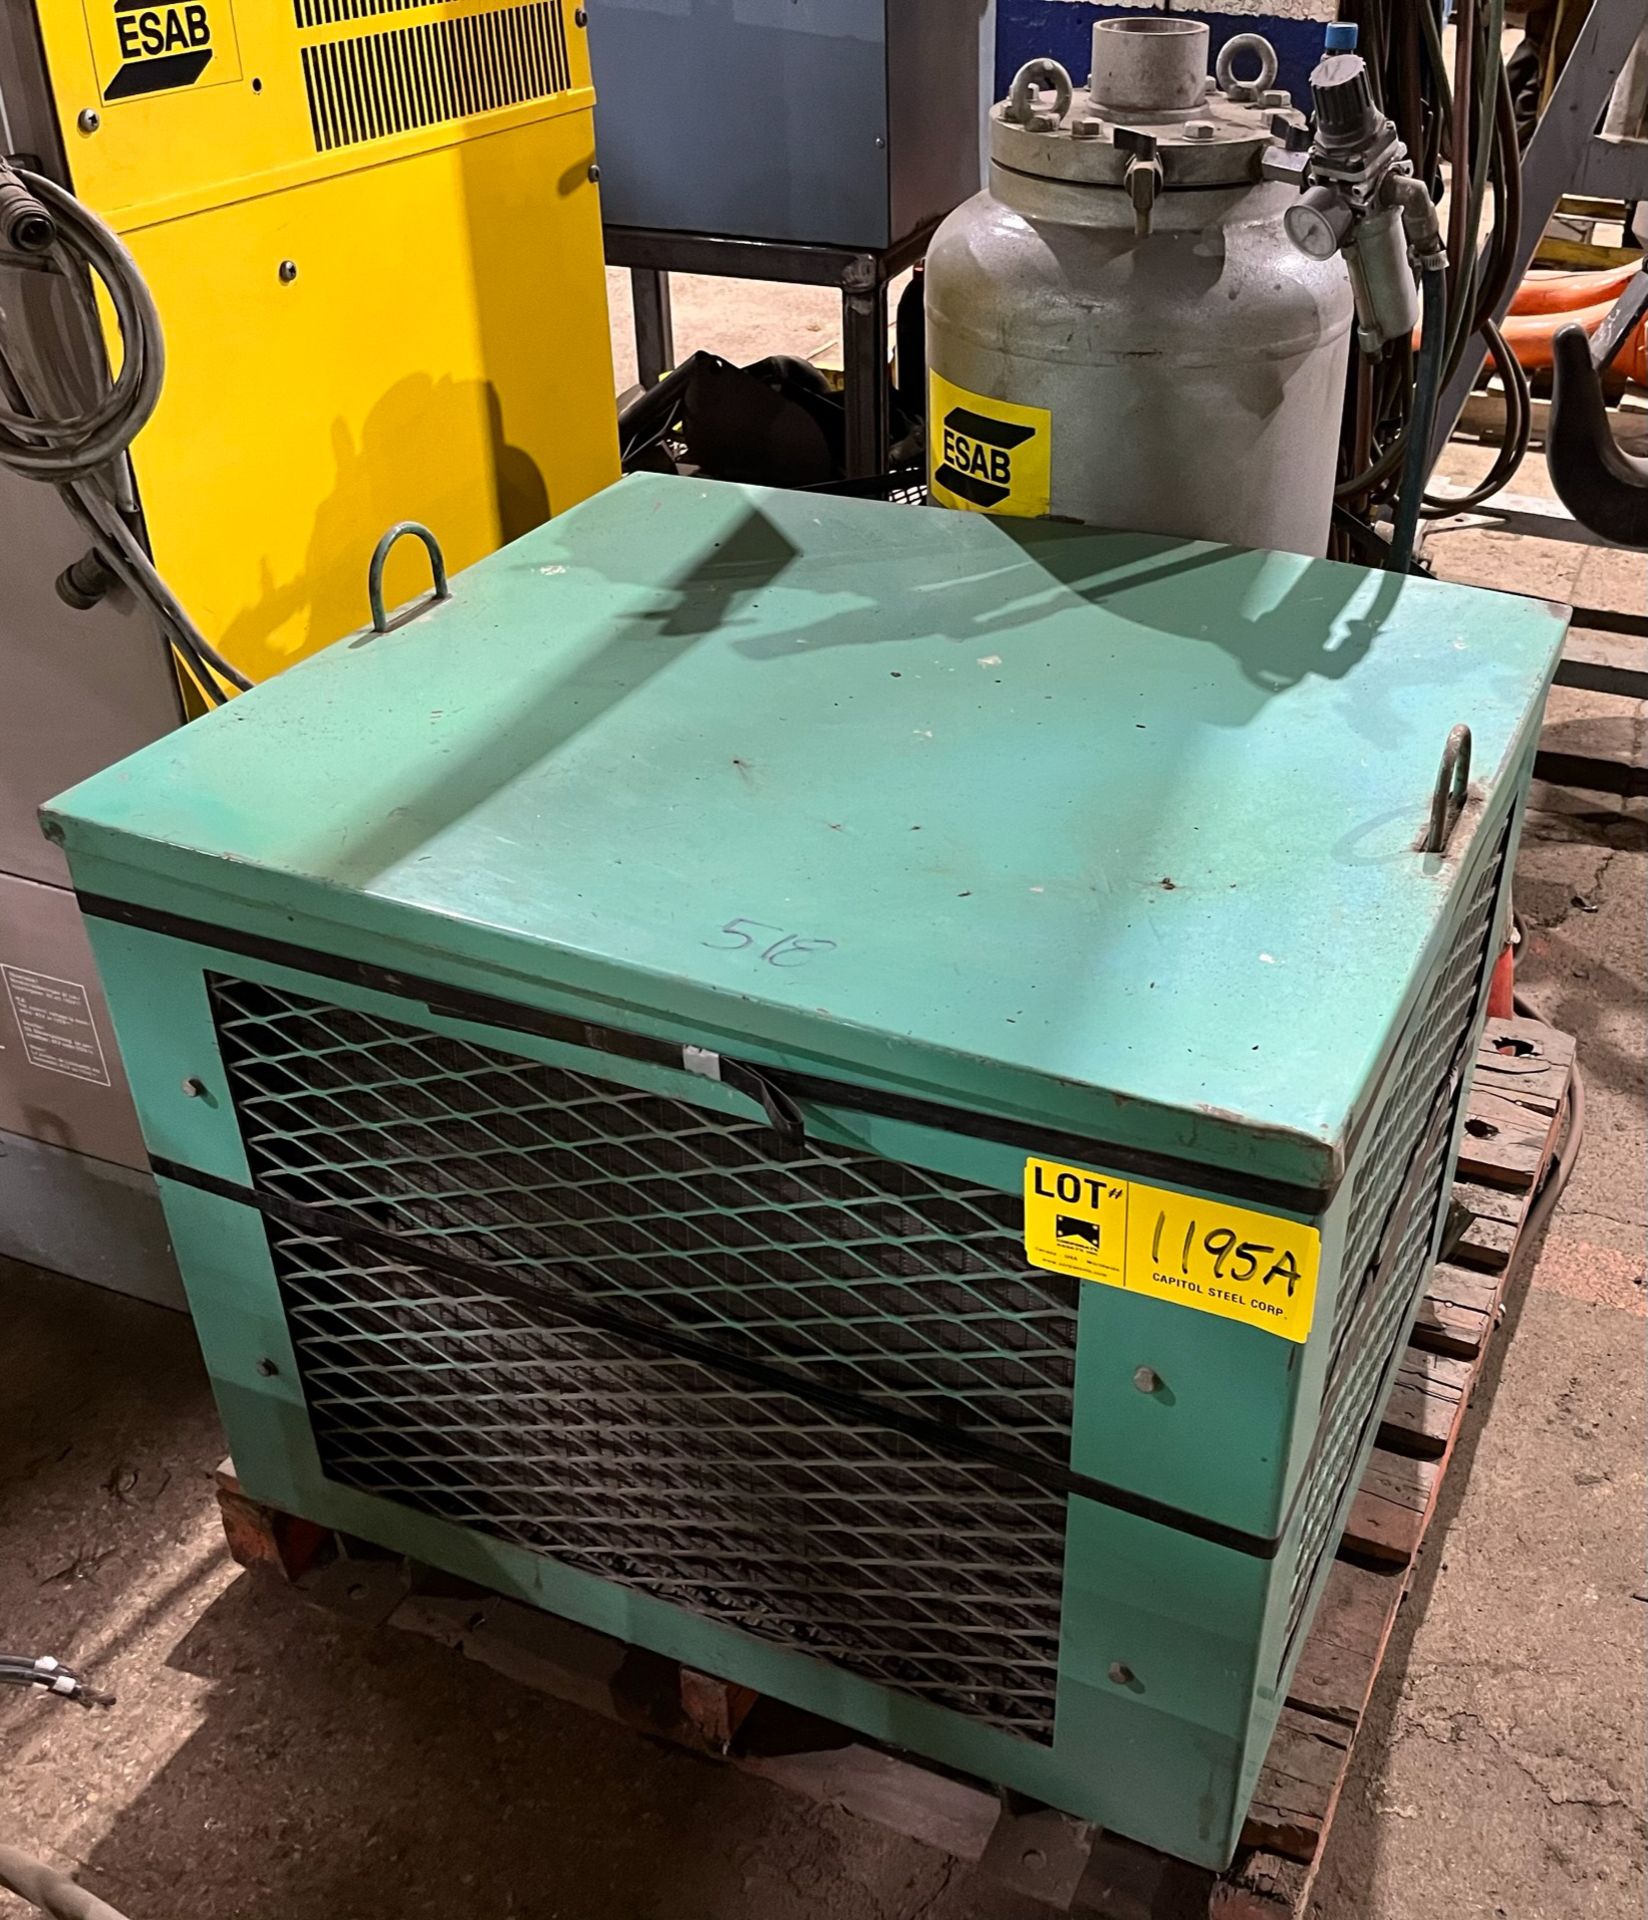 PRESSURE TANK & COOLING UNIT [RIGGING FEES FOR LOT #1195A - $30 USD PLUS APPLICABLE TAXES]